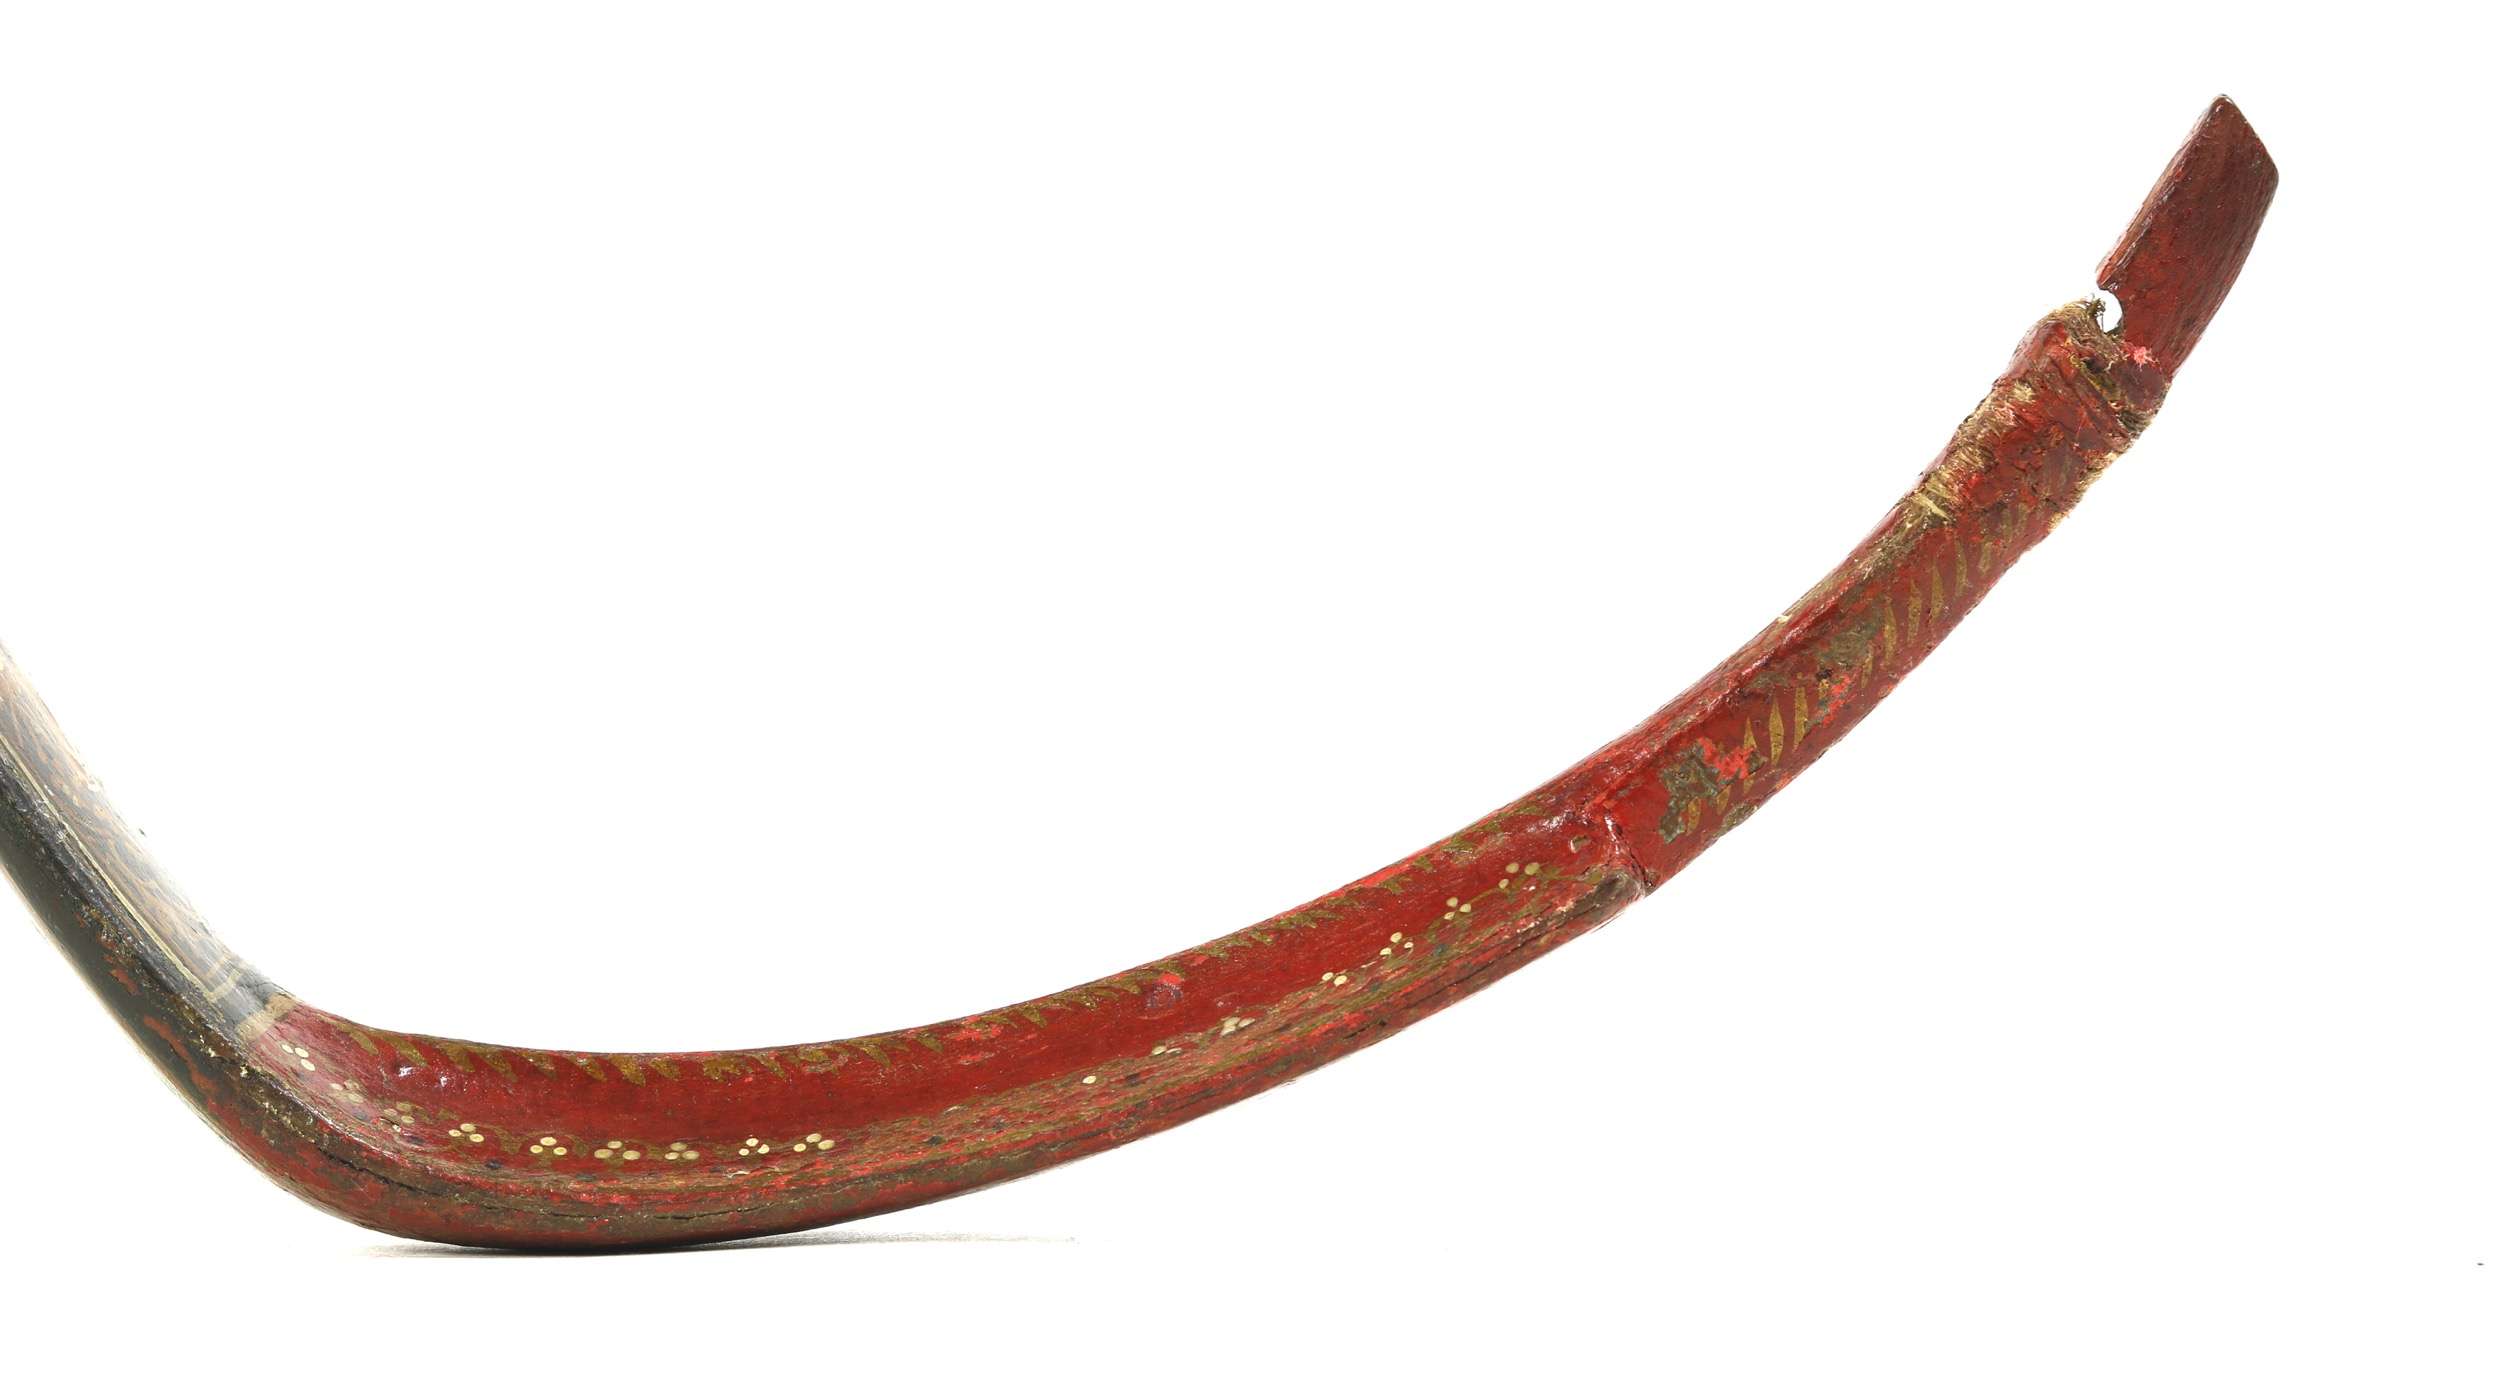 North Indian composite bow